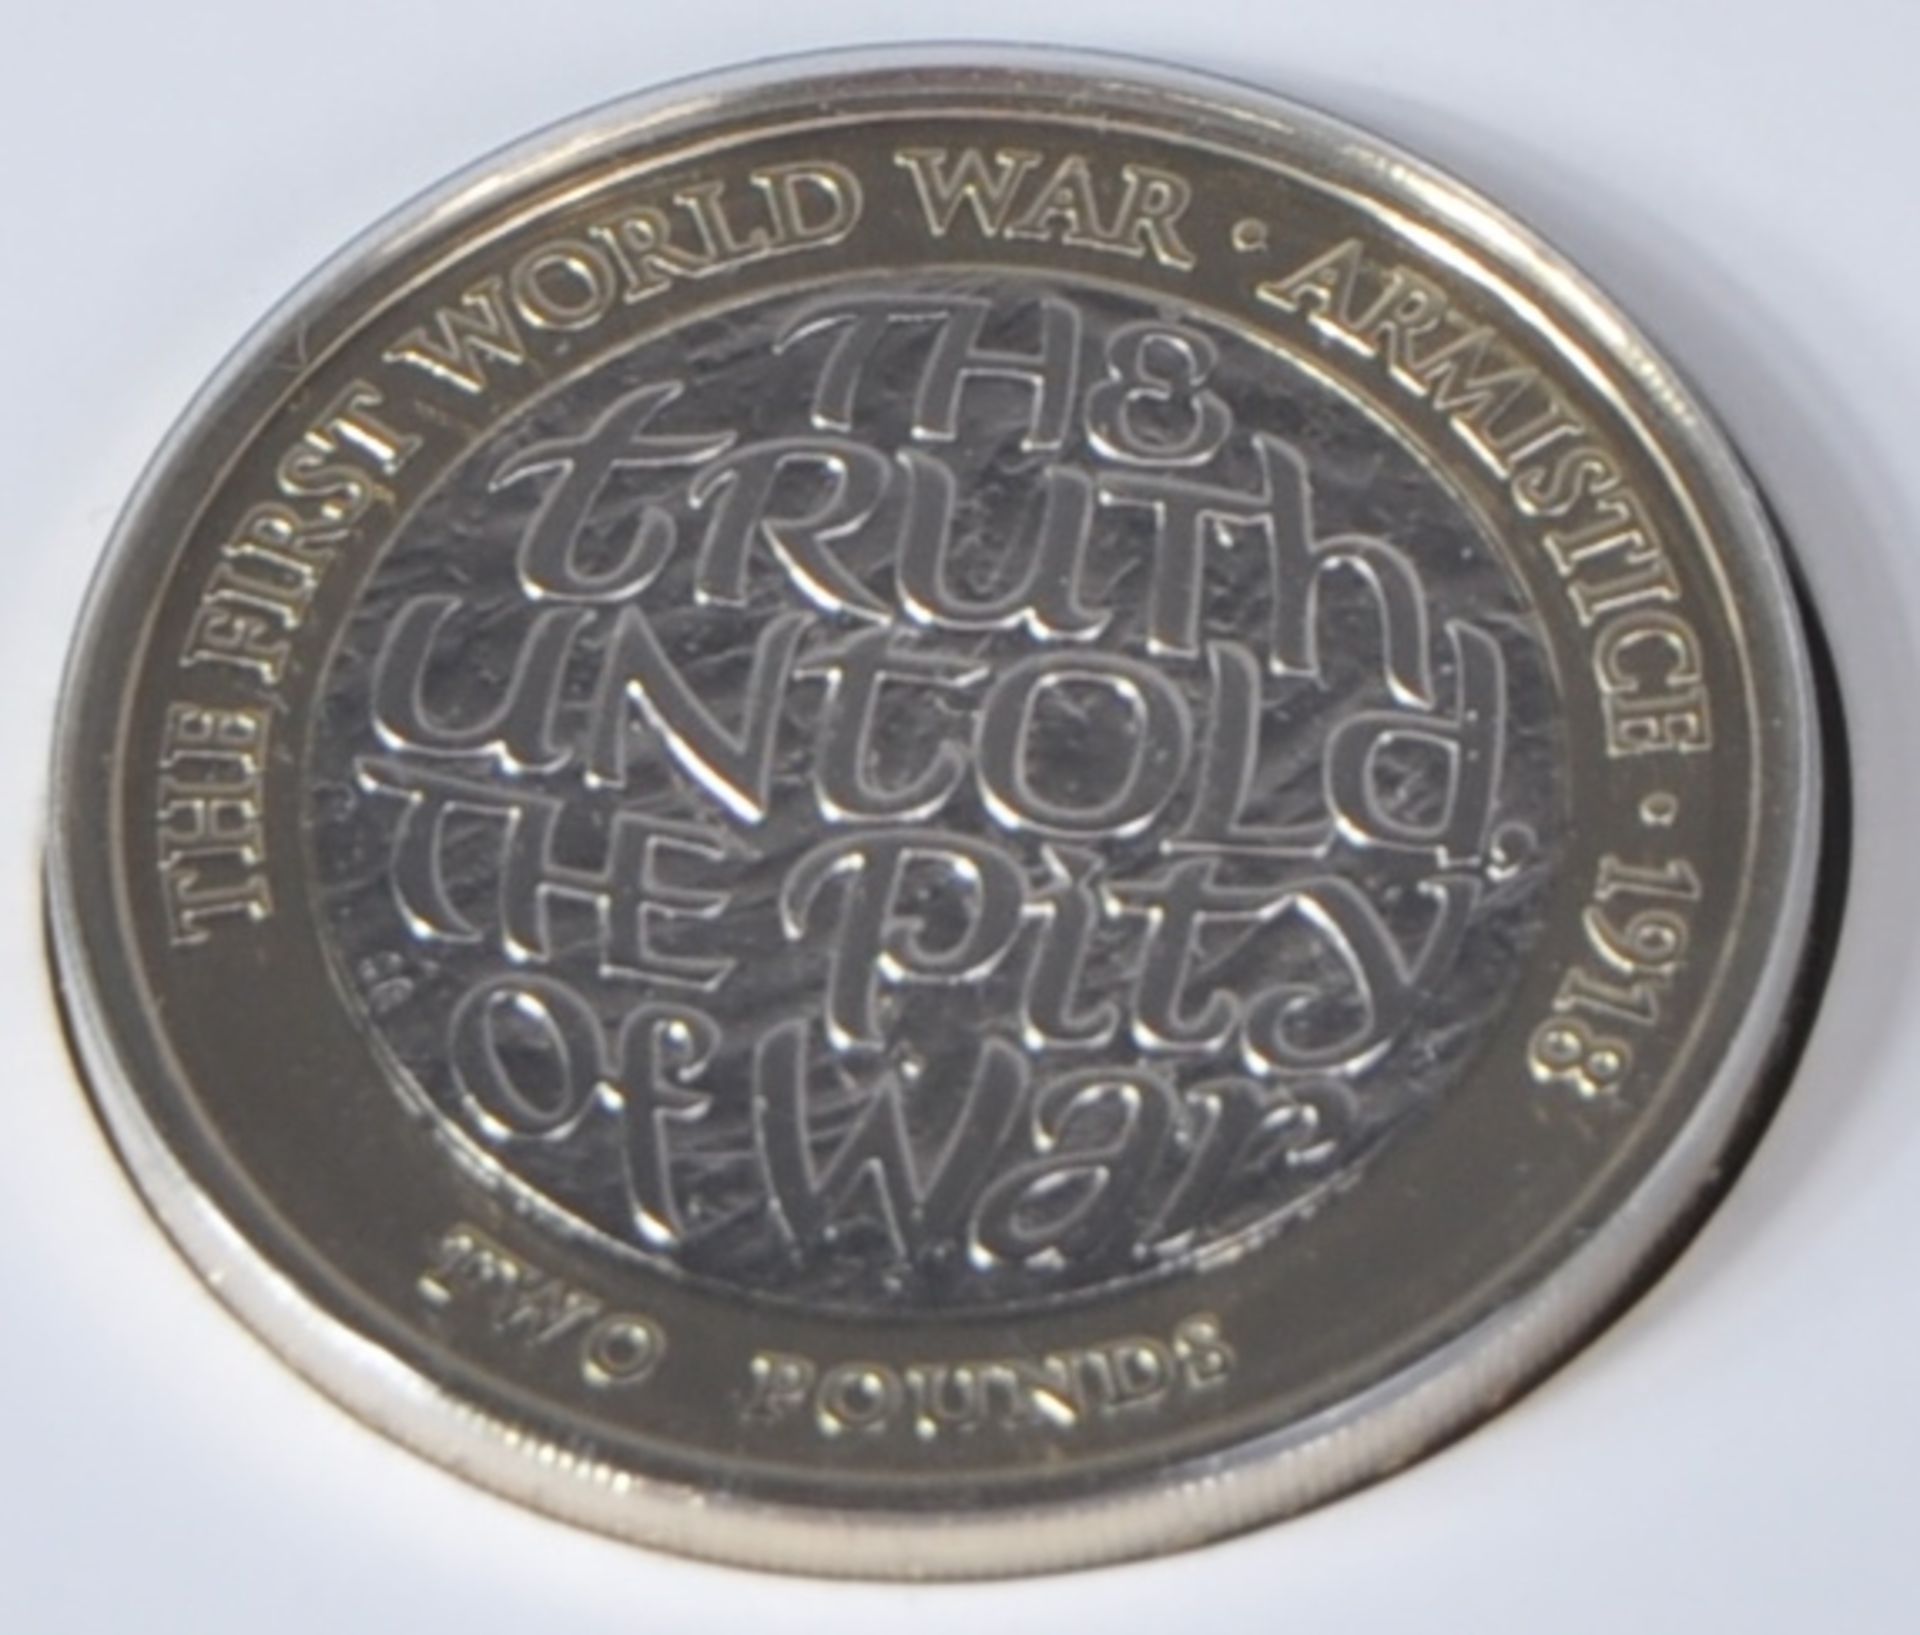 COINS - ROYAL MINT - COLLECTION OF £2 UNCIRCULATED COINS - Image 6 of 6